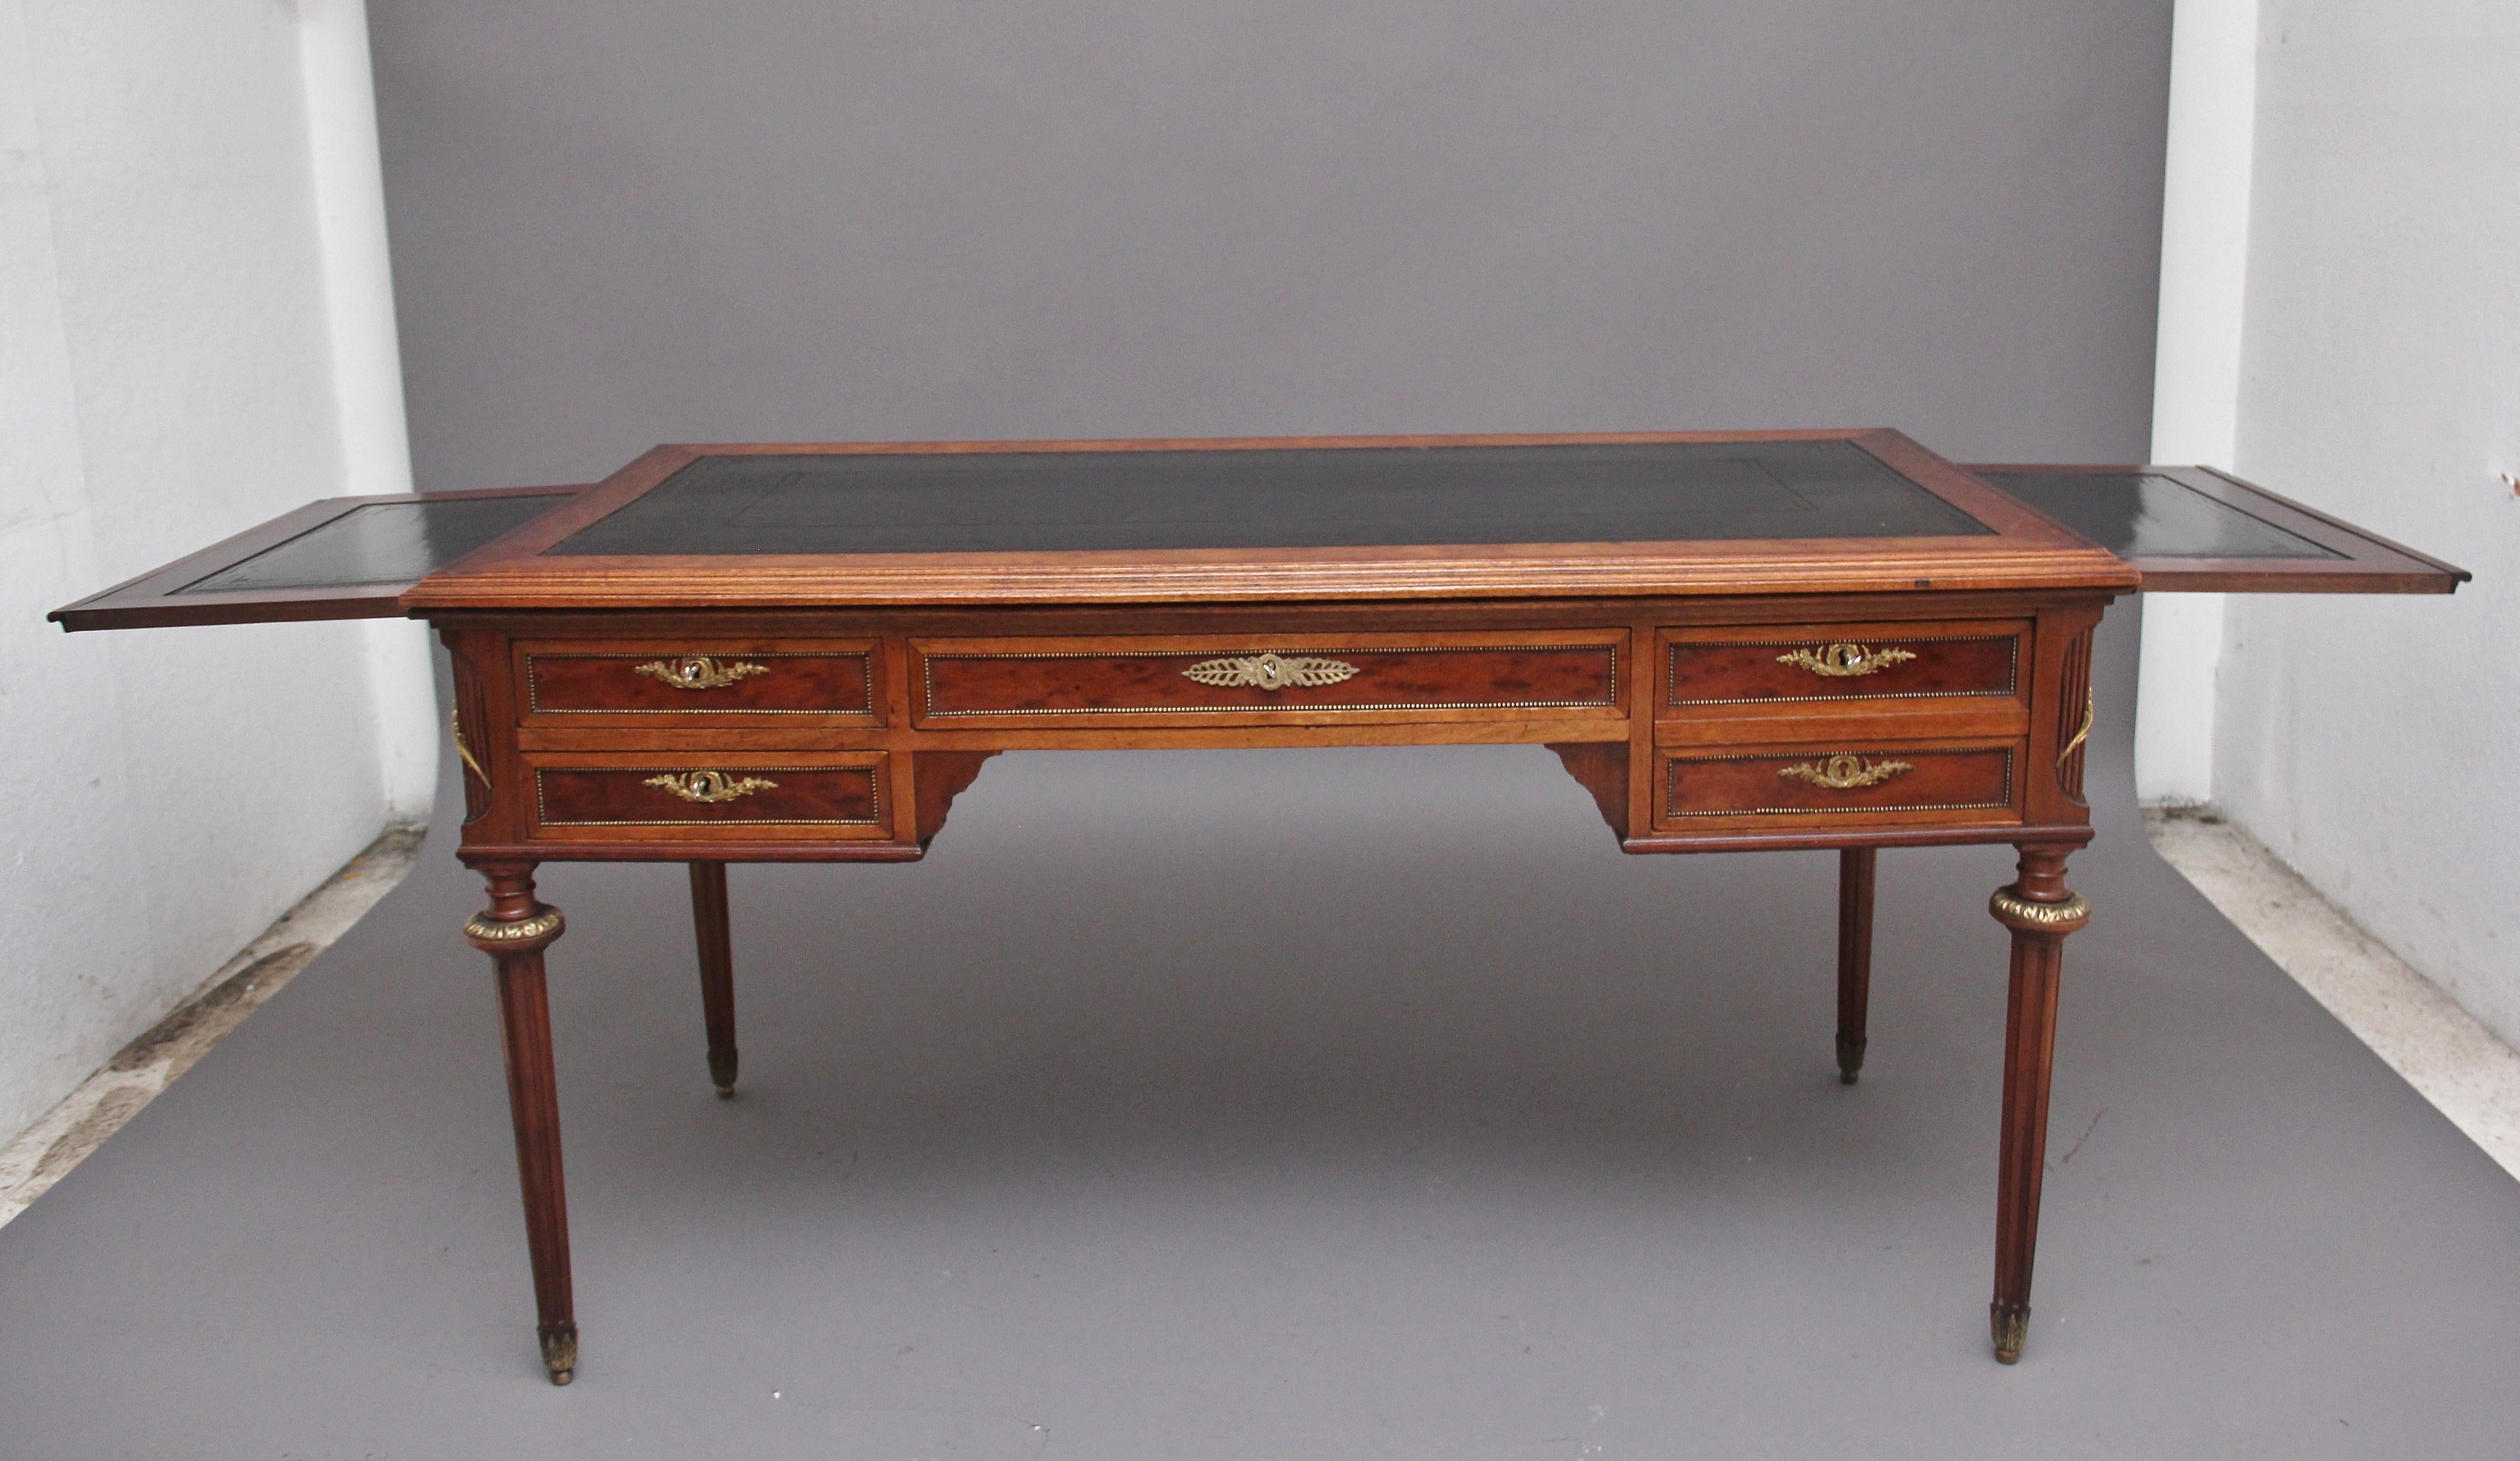 19th Century French mahogany directoire writing desk, the moulded edge top having a green leather writing surface decorated with blind and gilt tooling, the edge of the top having ebony inlay, pull out slides either side incorporating the same style